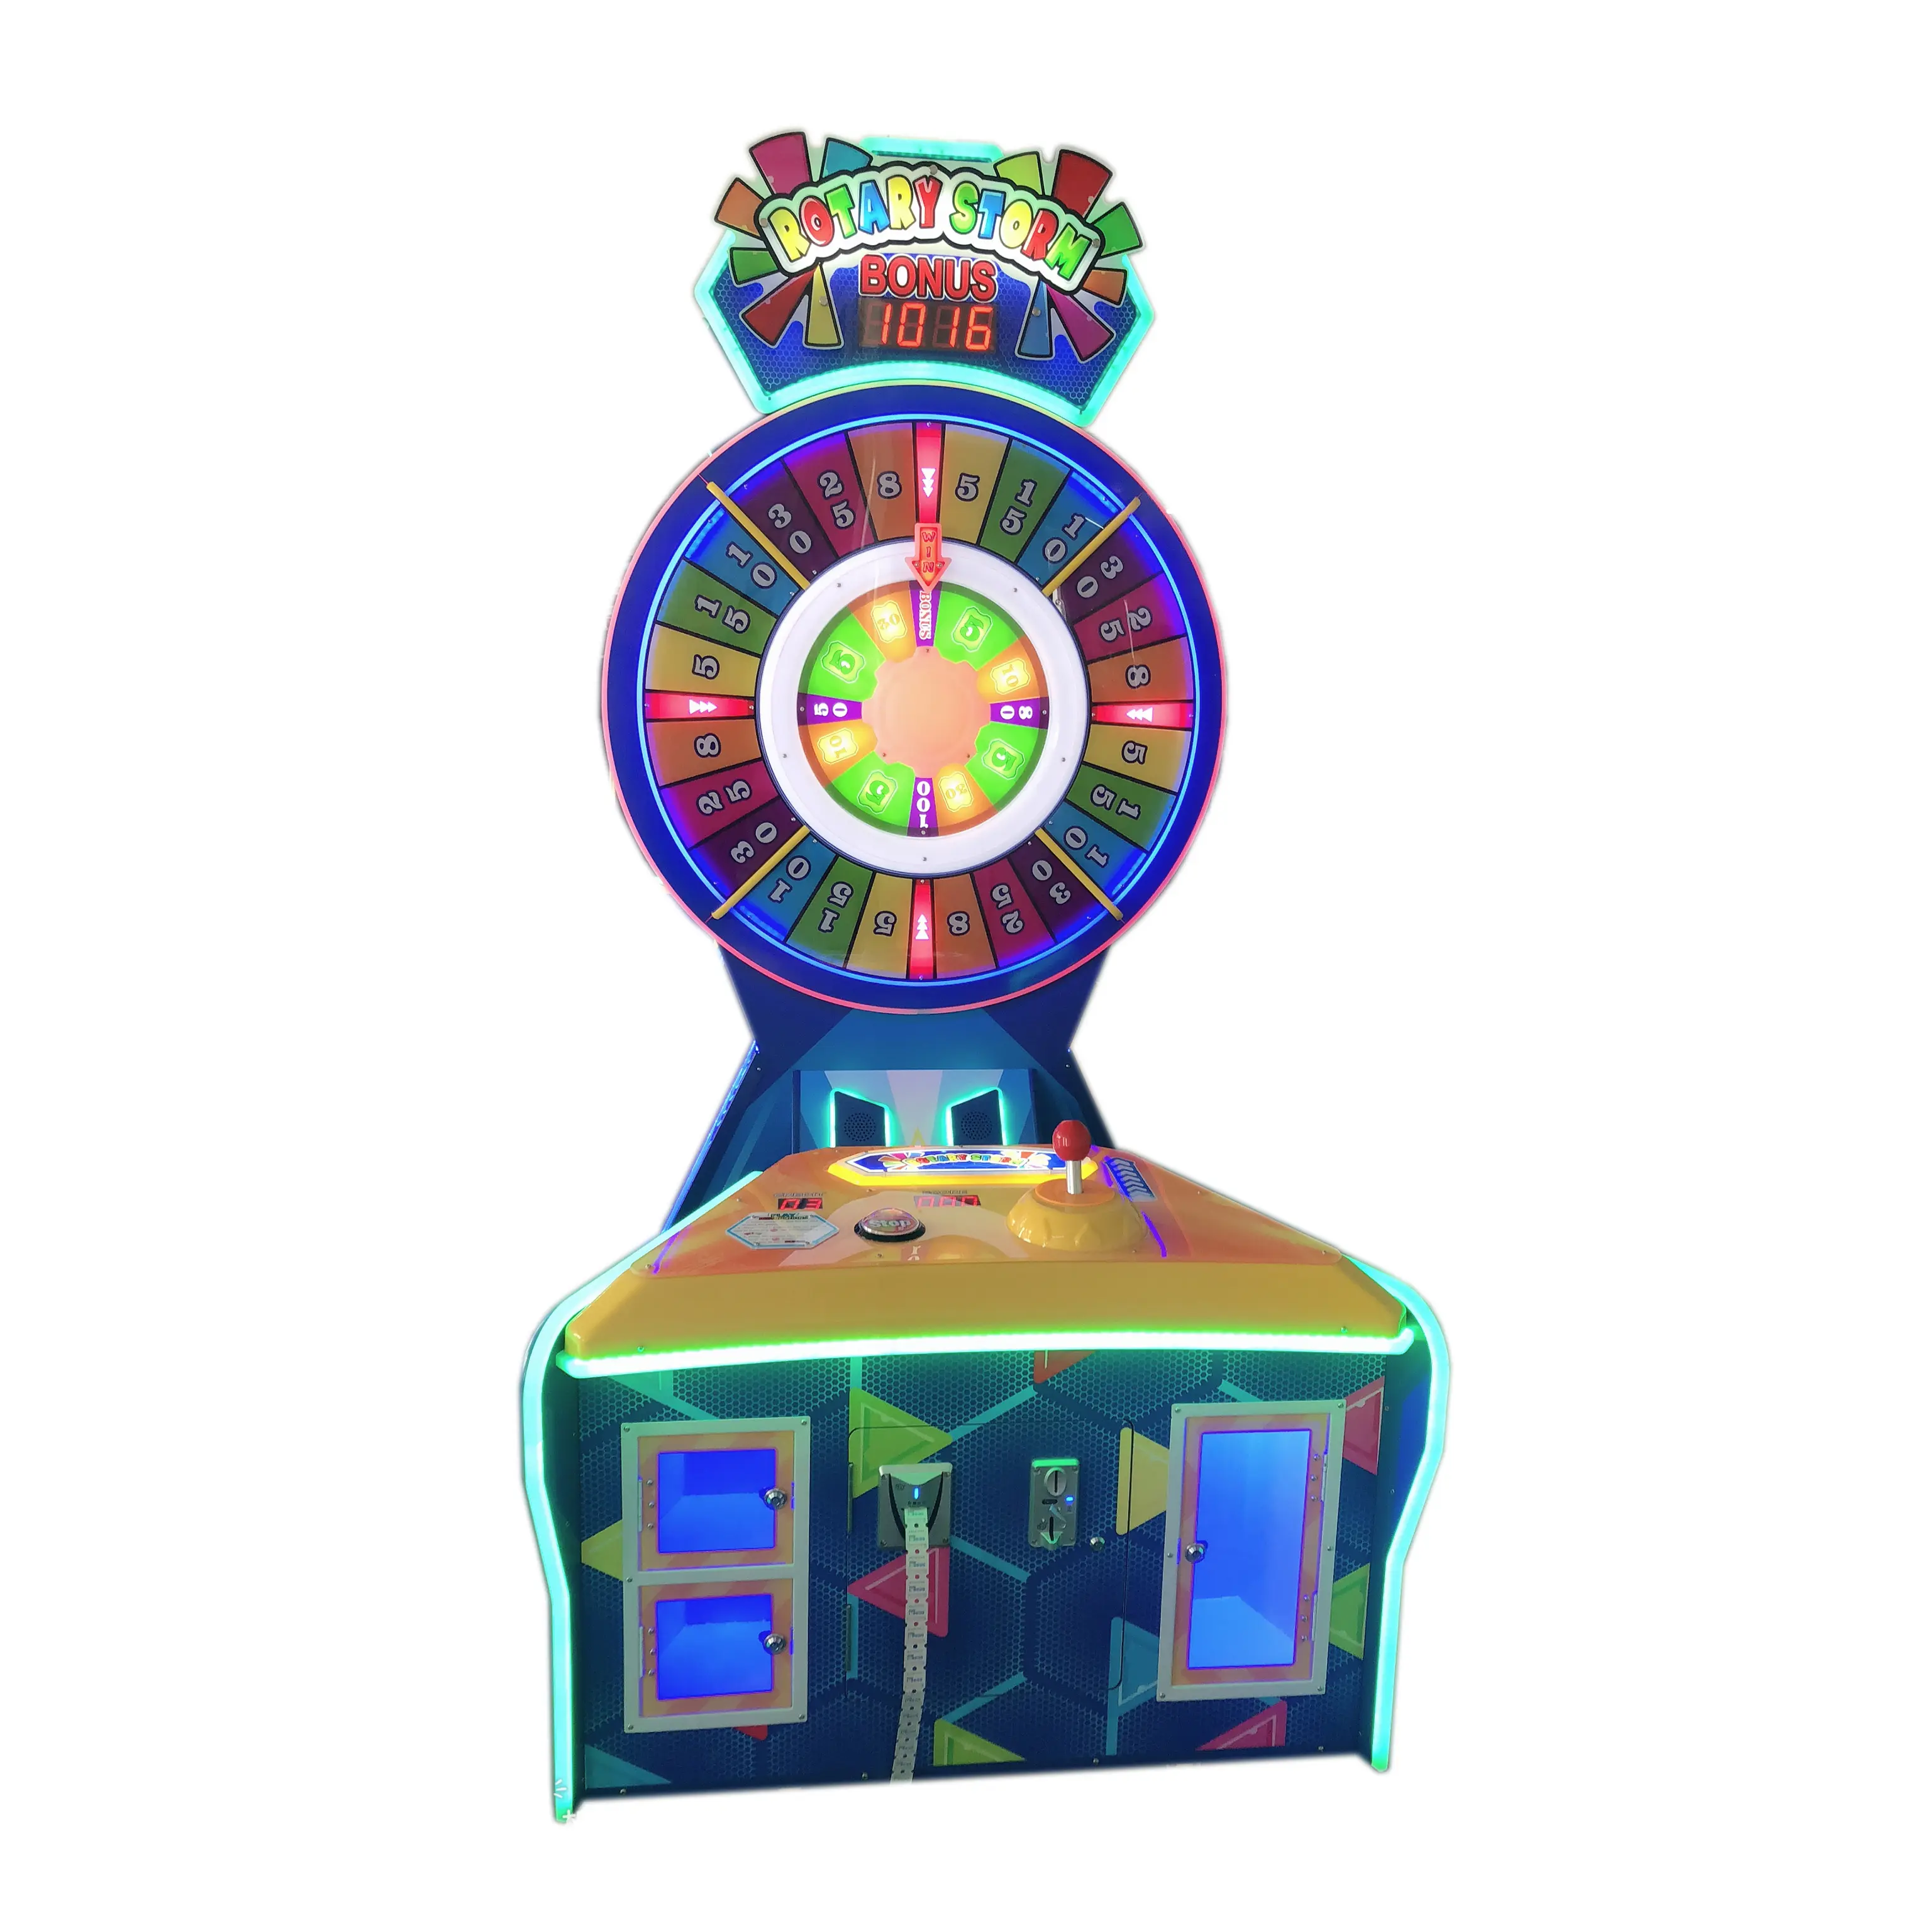 High-end classic luxury design machines games for kids game machine mini coin operated slot